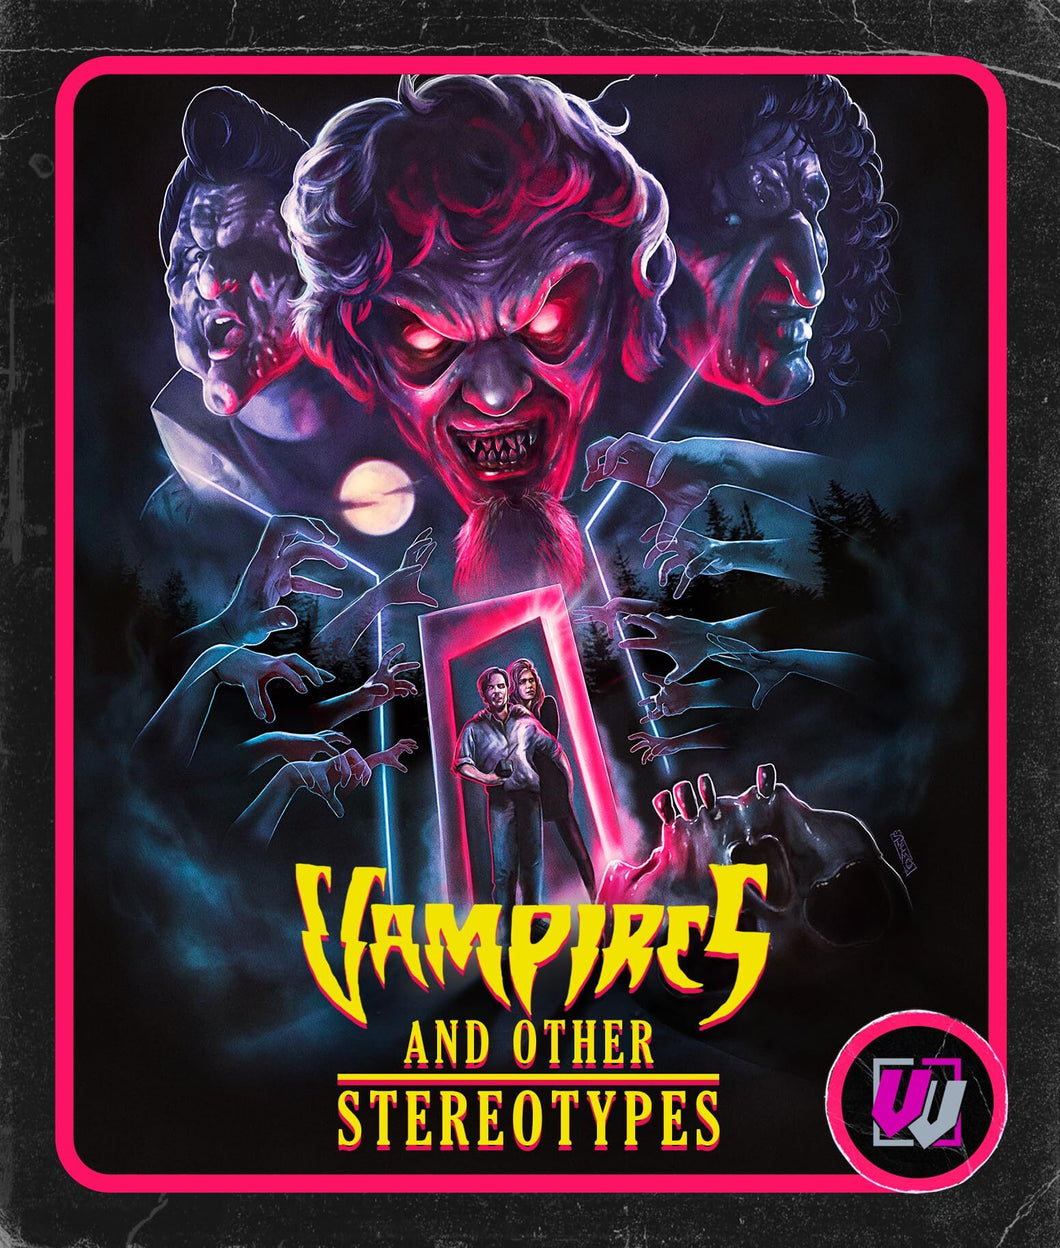 Vampires and Other Stereotypes (1994) - front cover